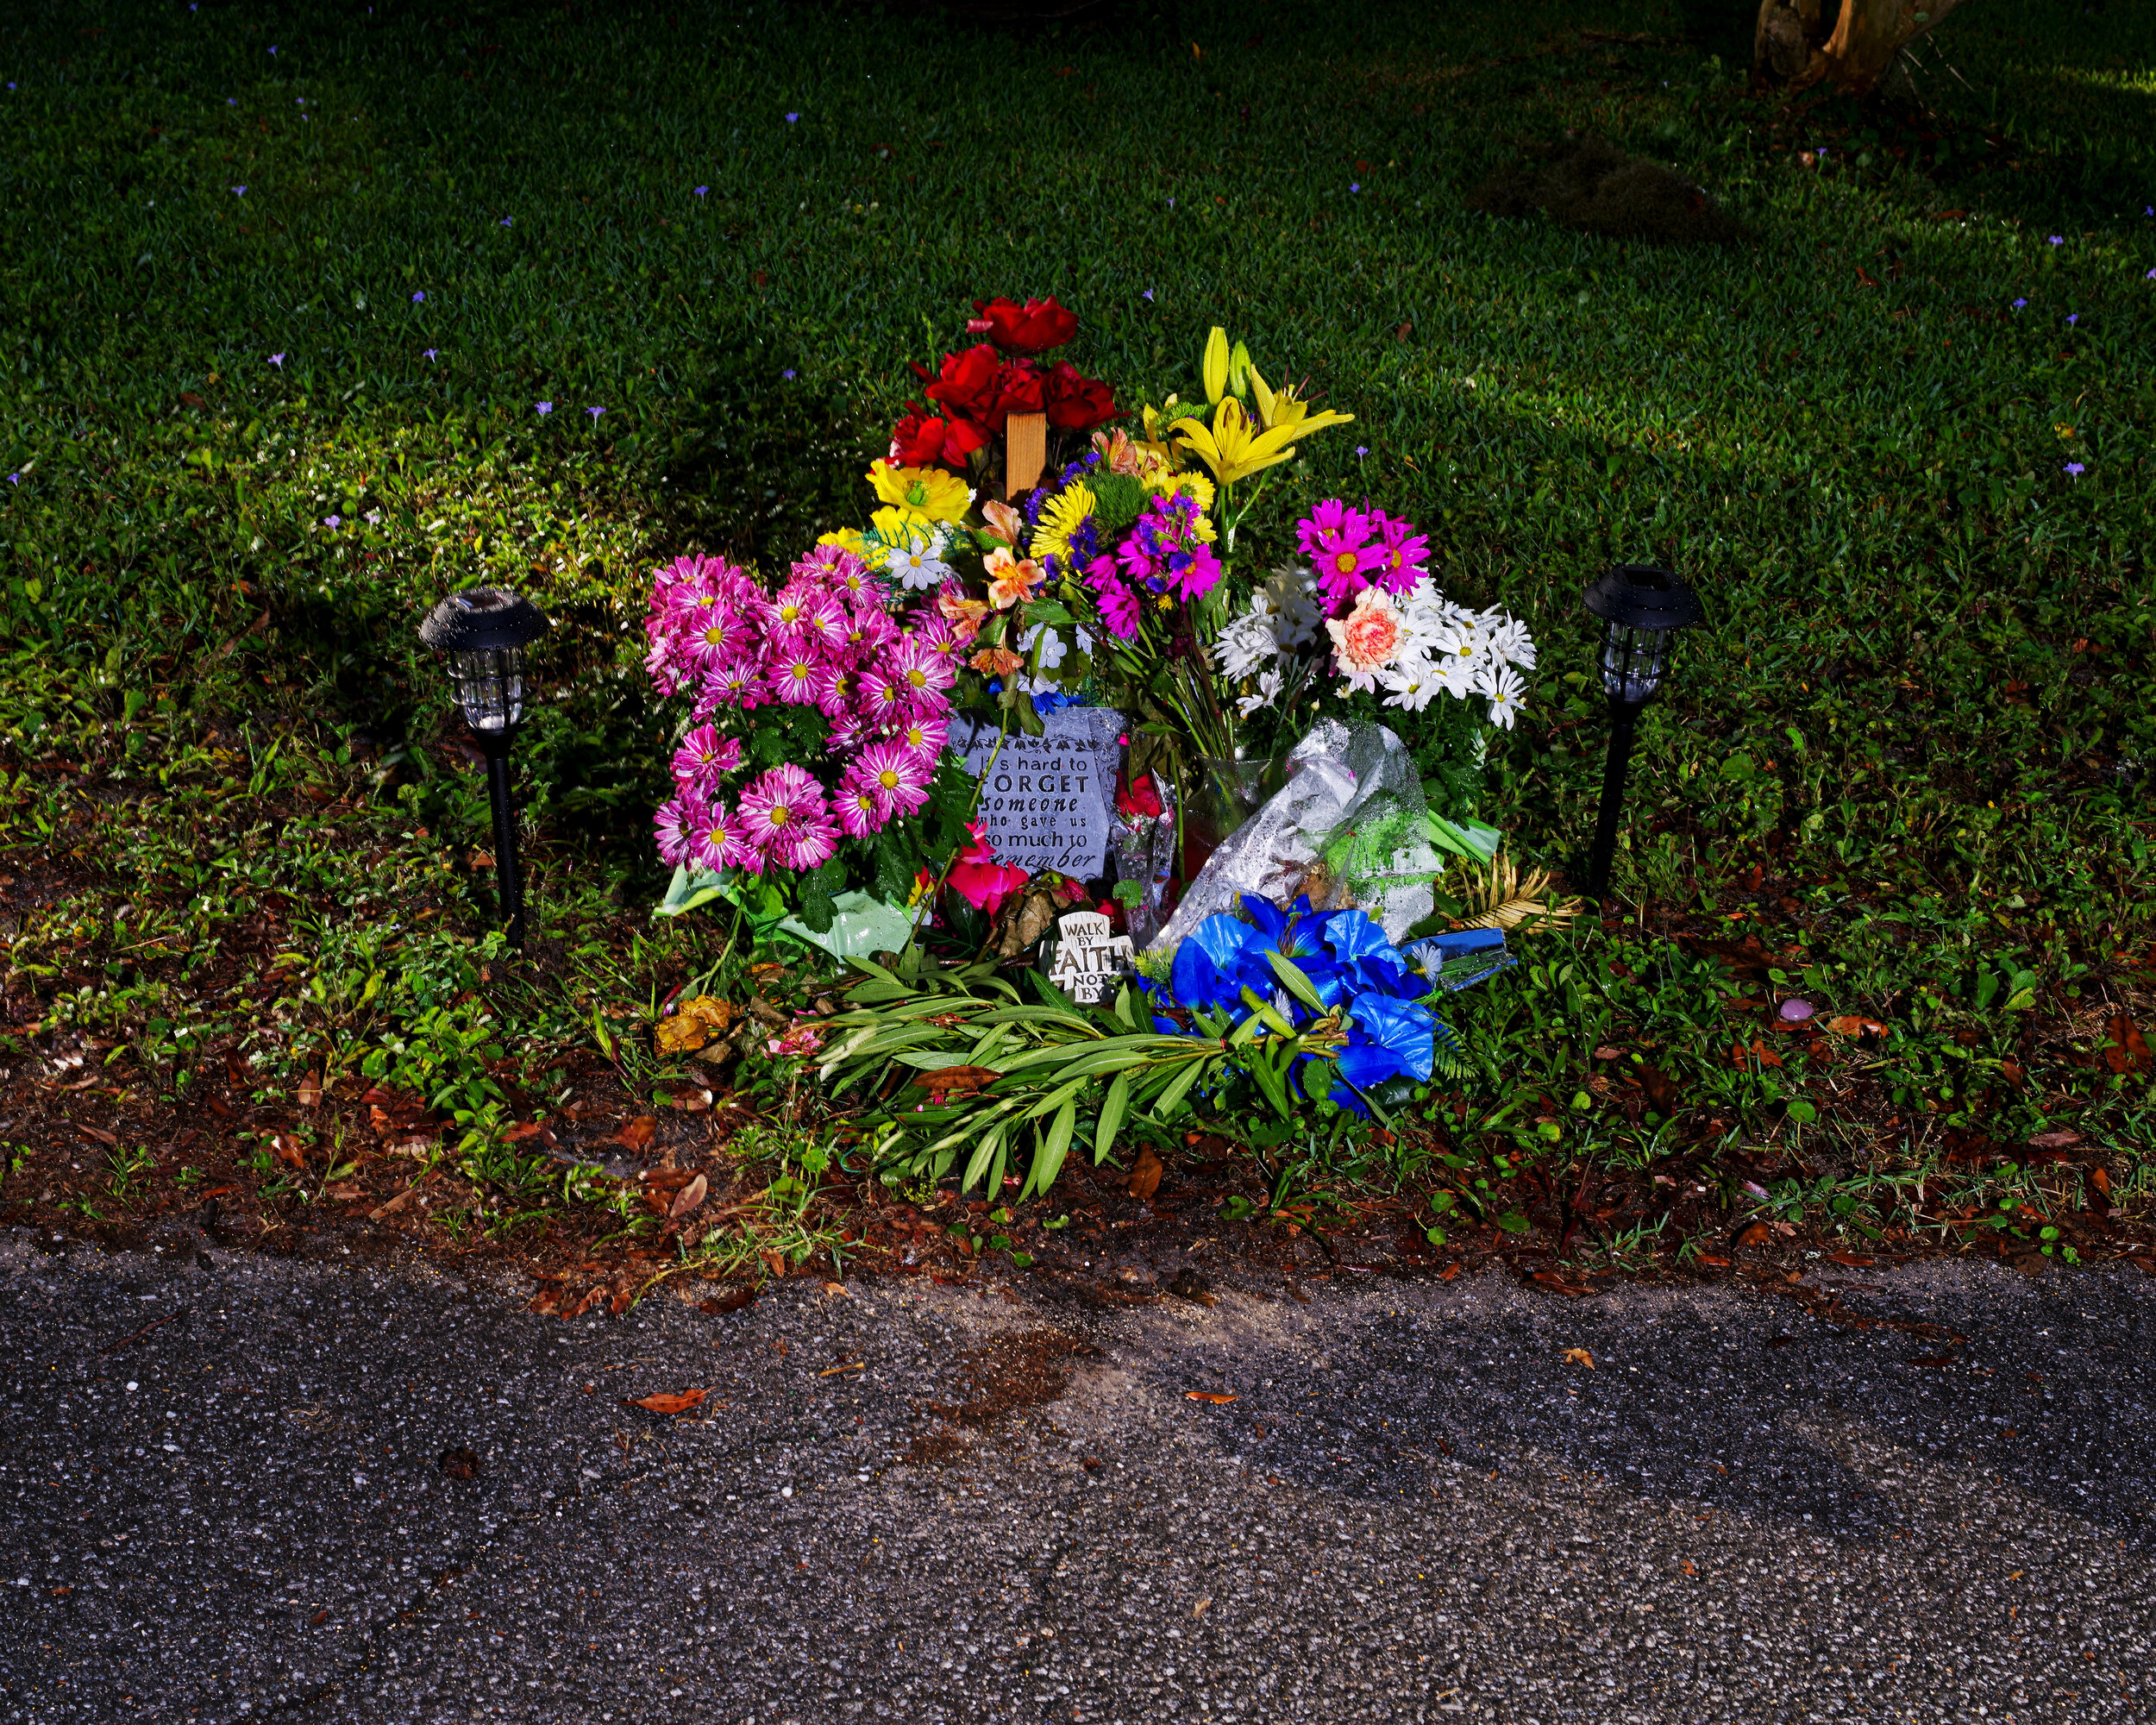  The spot where Arbery was shot and killed in the Satilla Shores neighborhood.  